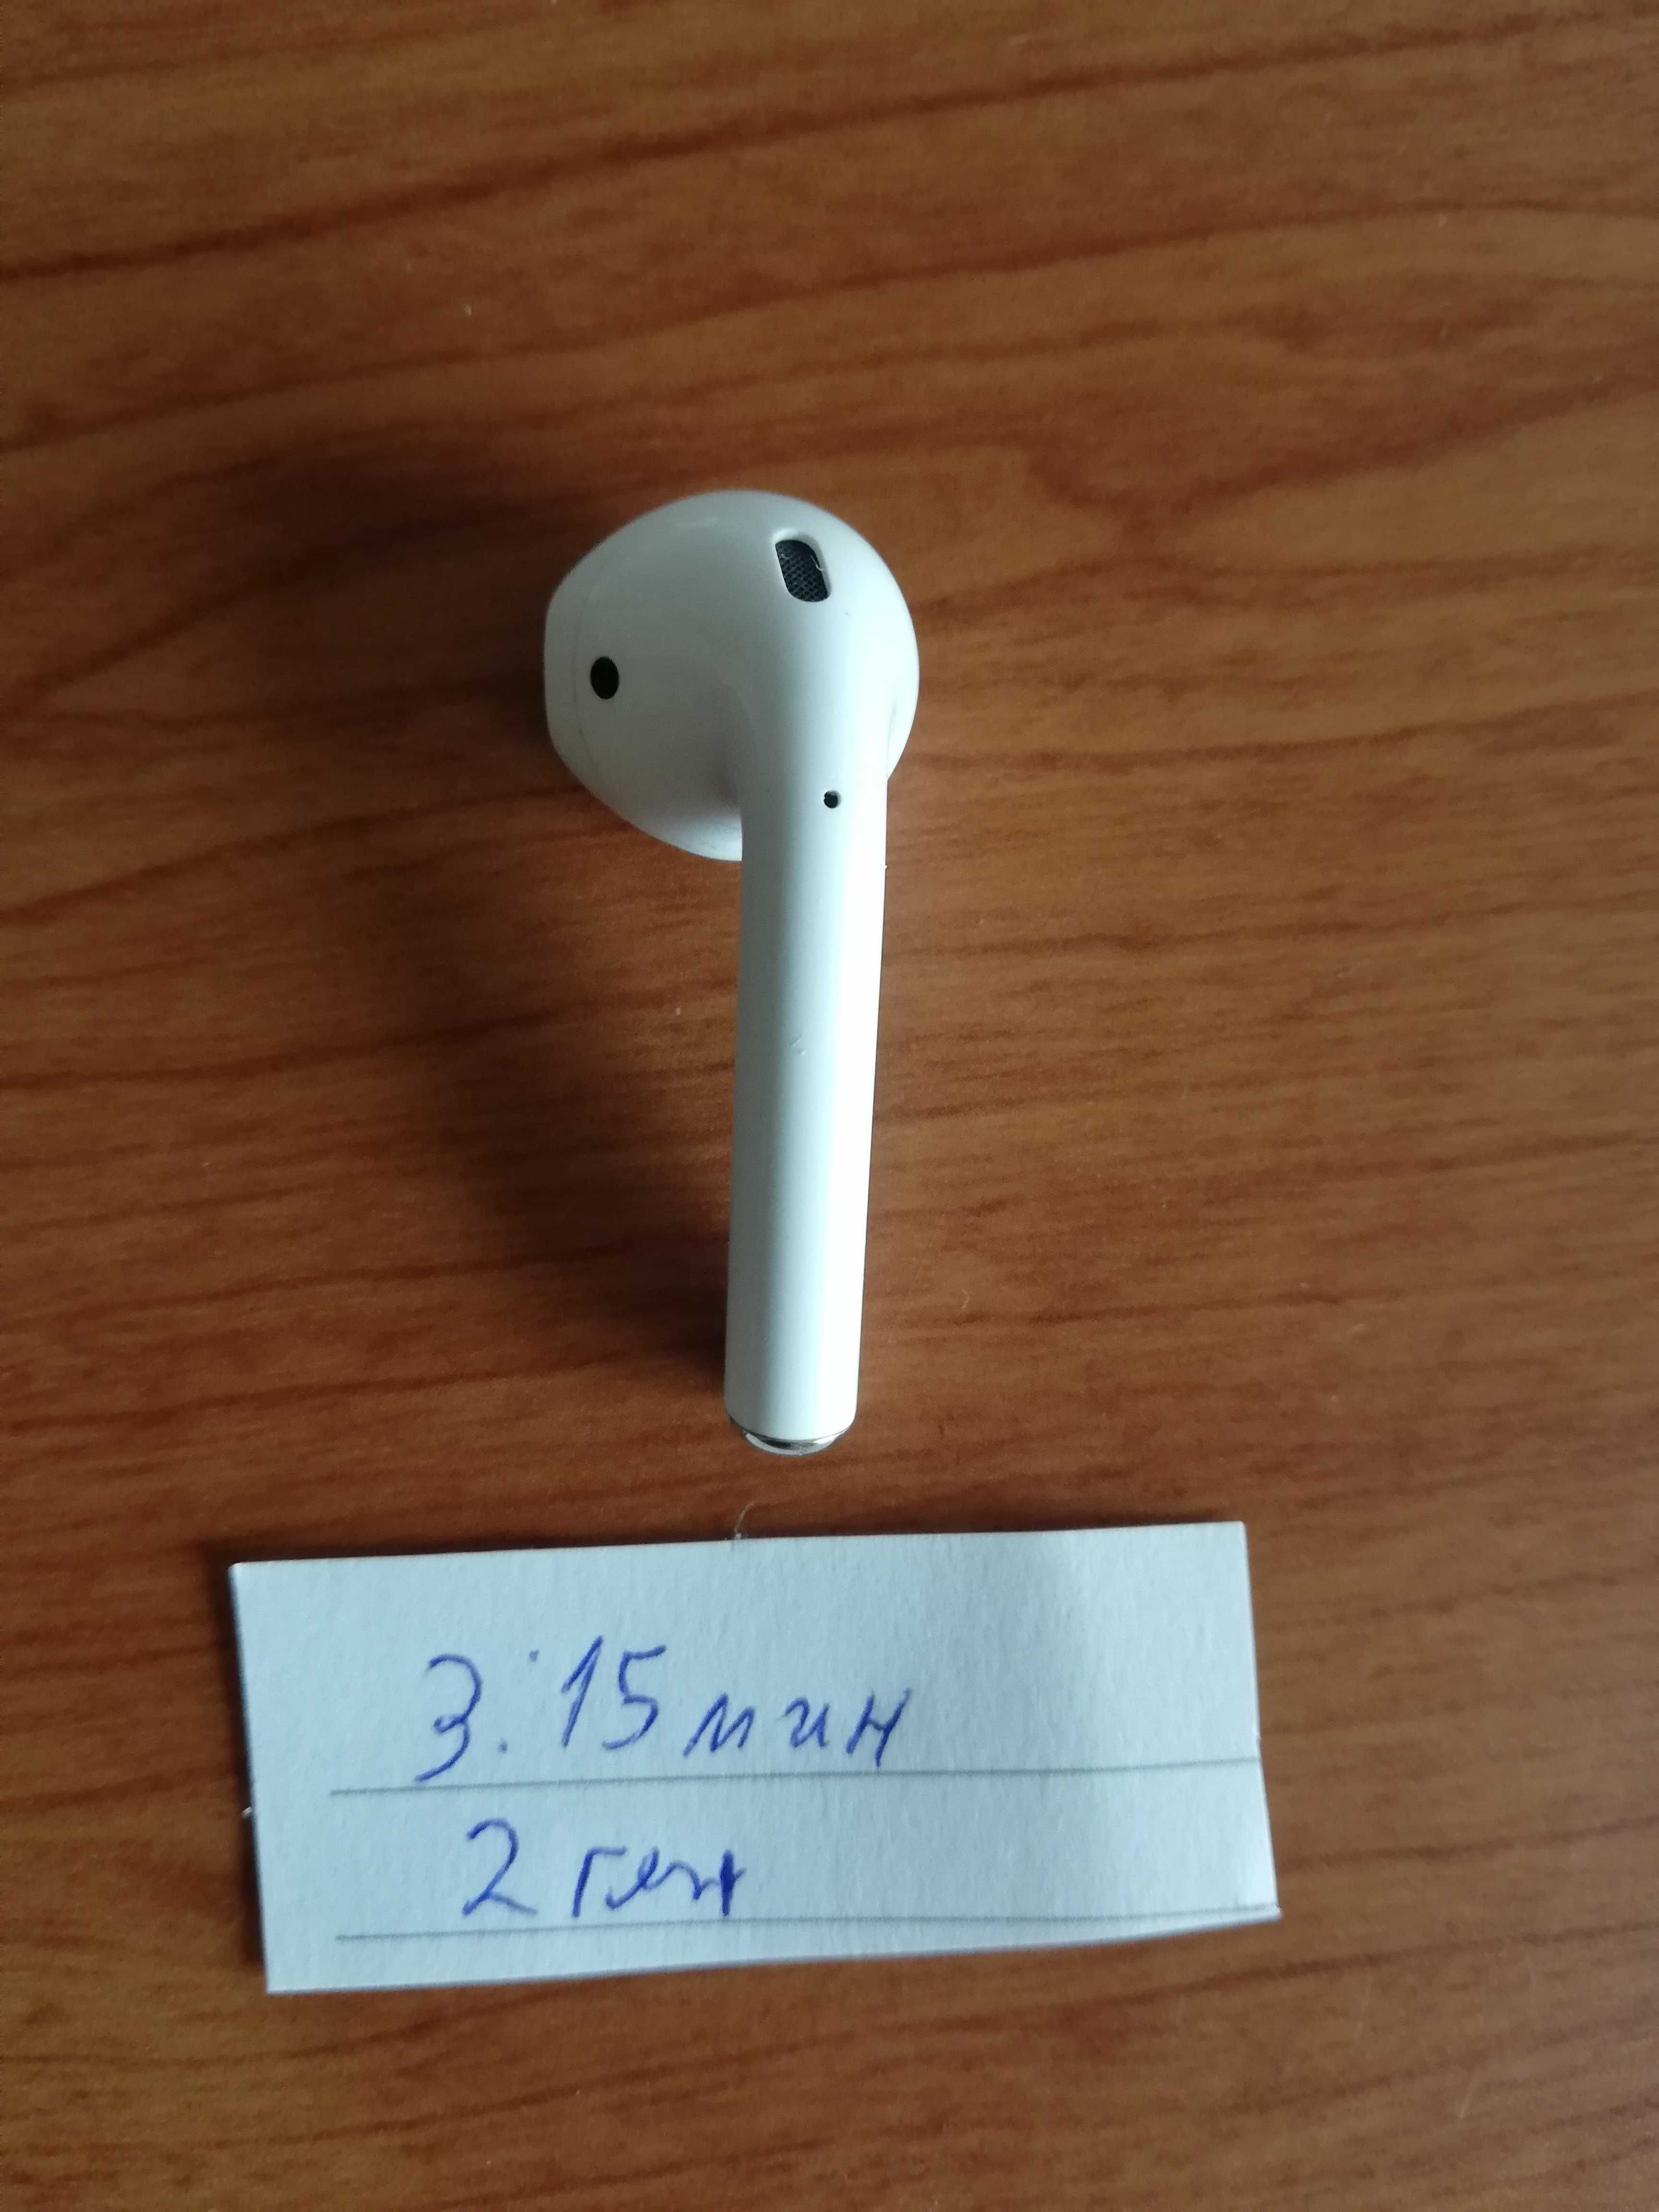 Apple Airpods 2gn слушалки лява и дясна